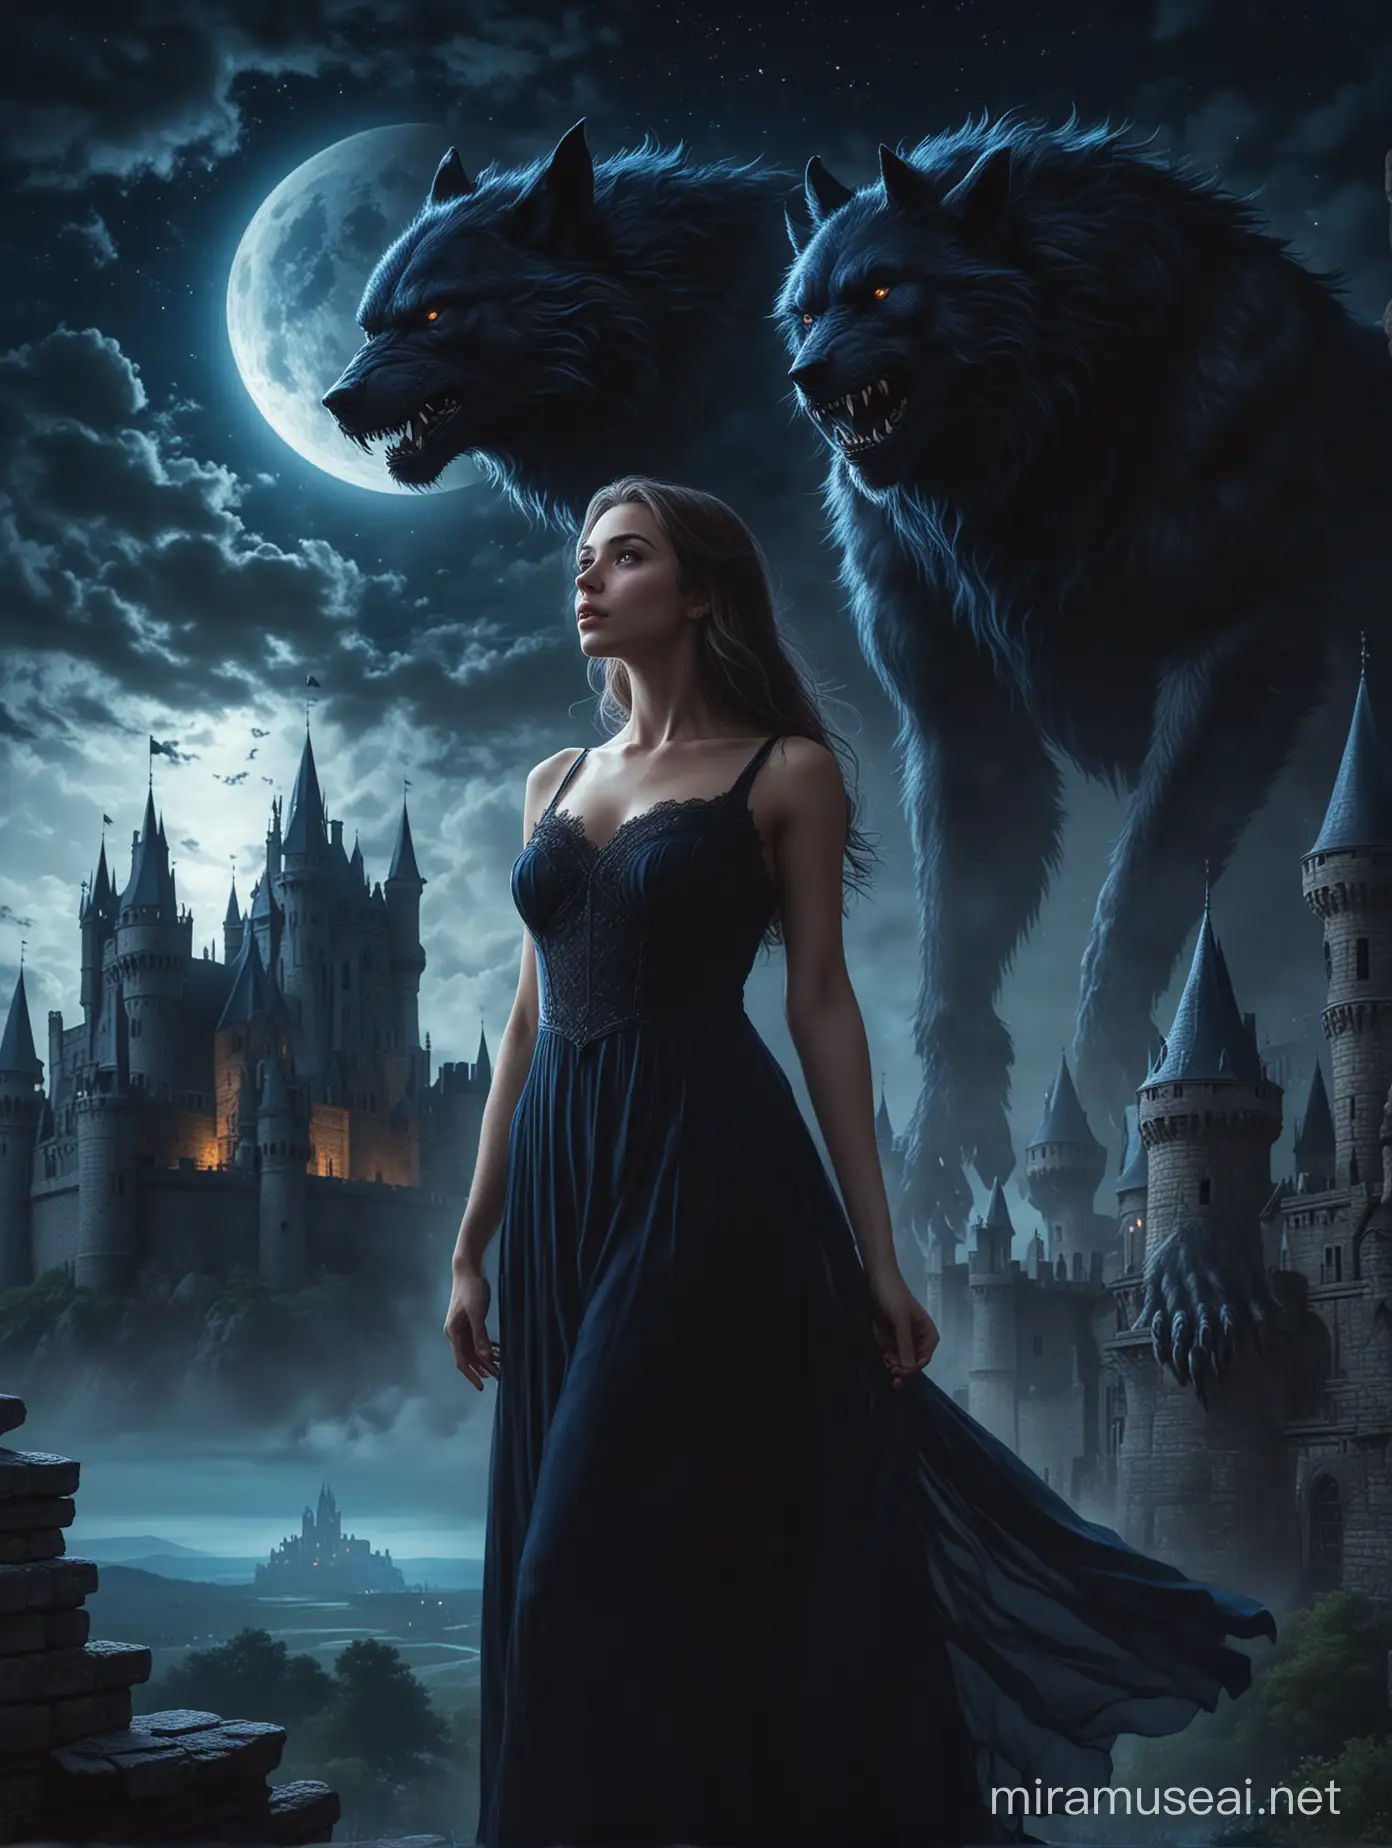 Majestic Lady and Werewolf Under Starlit Sky with Castle Silhouette